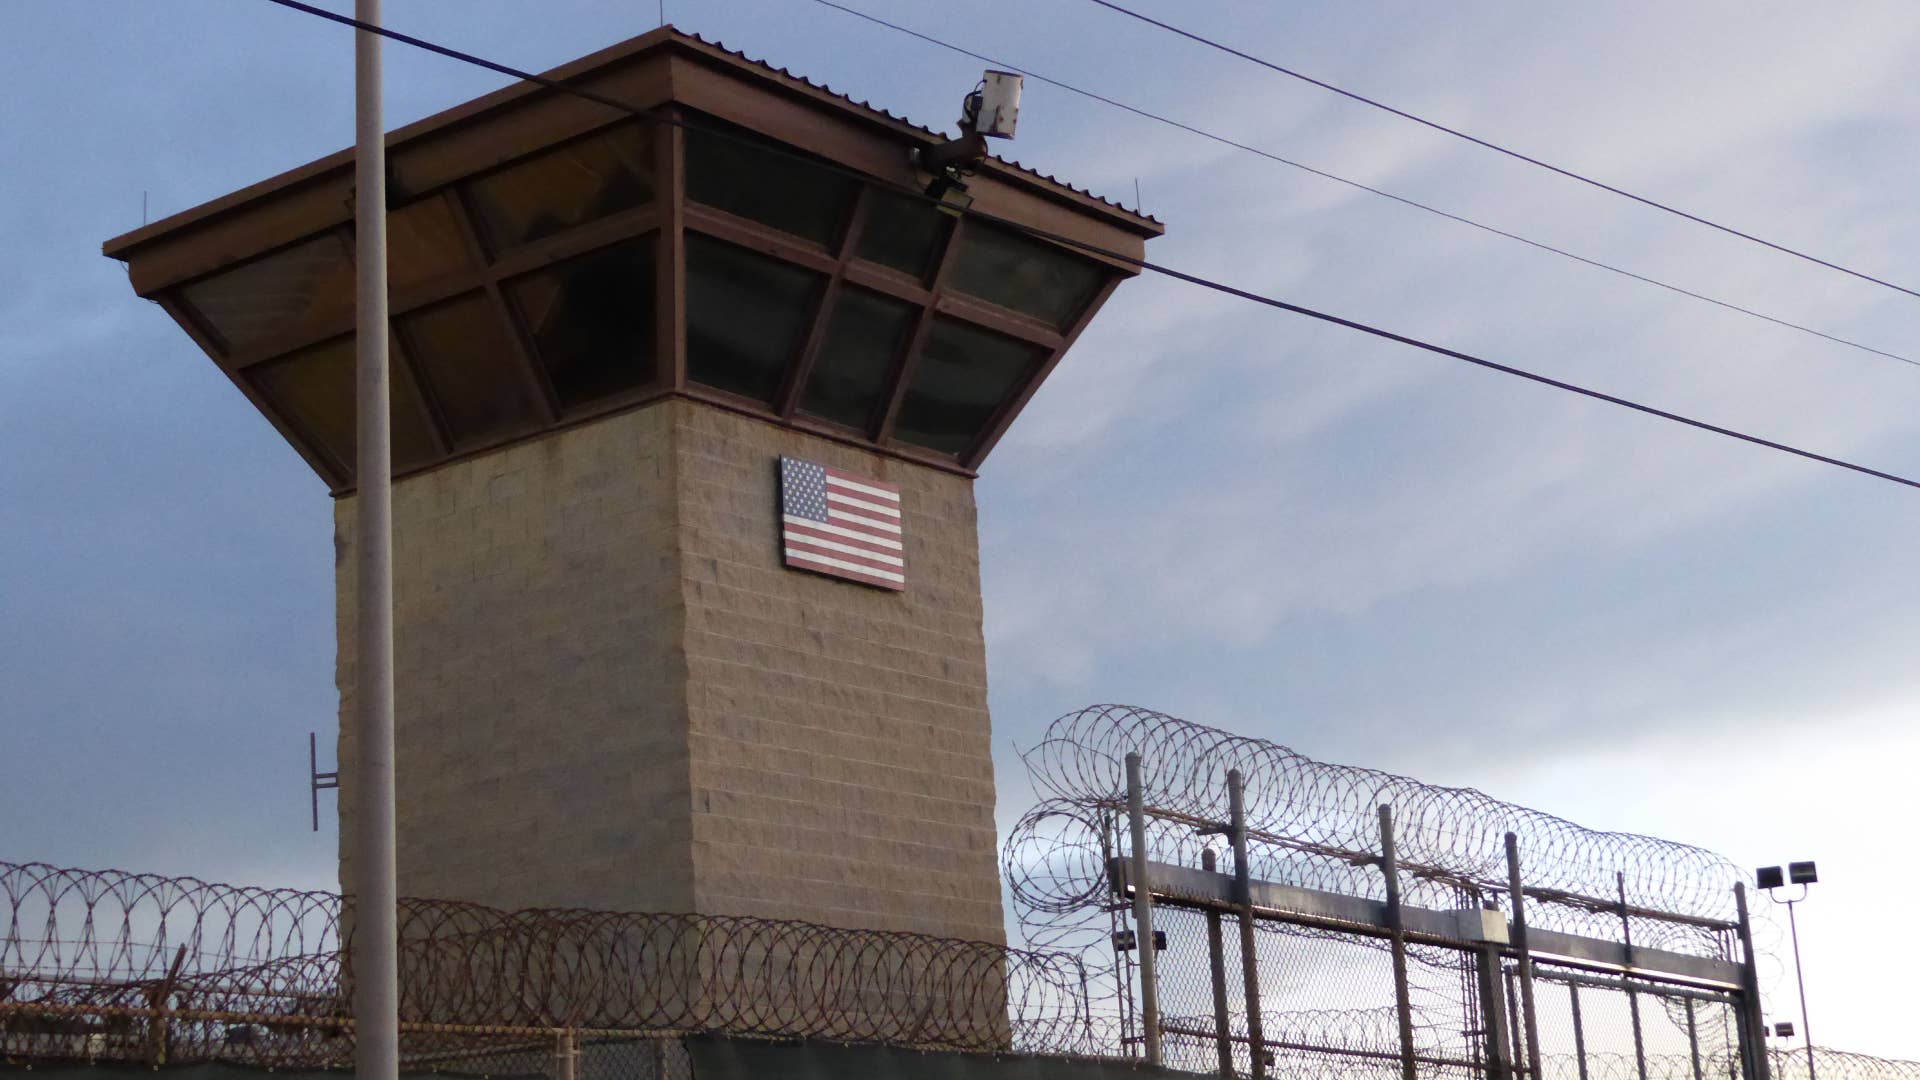 An American flag is shown above a prison entrance.